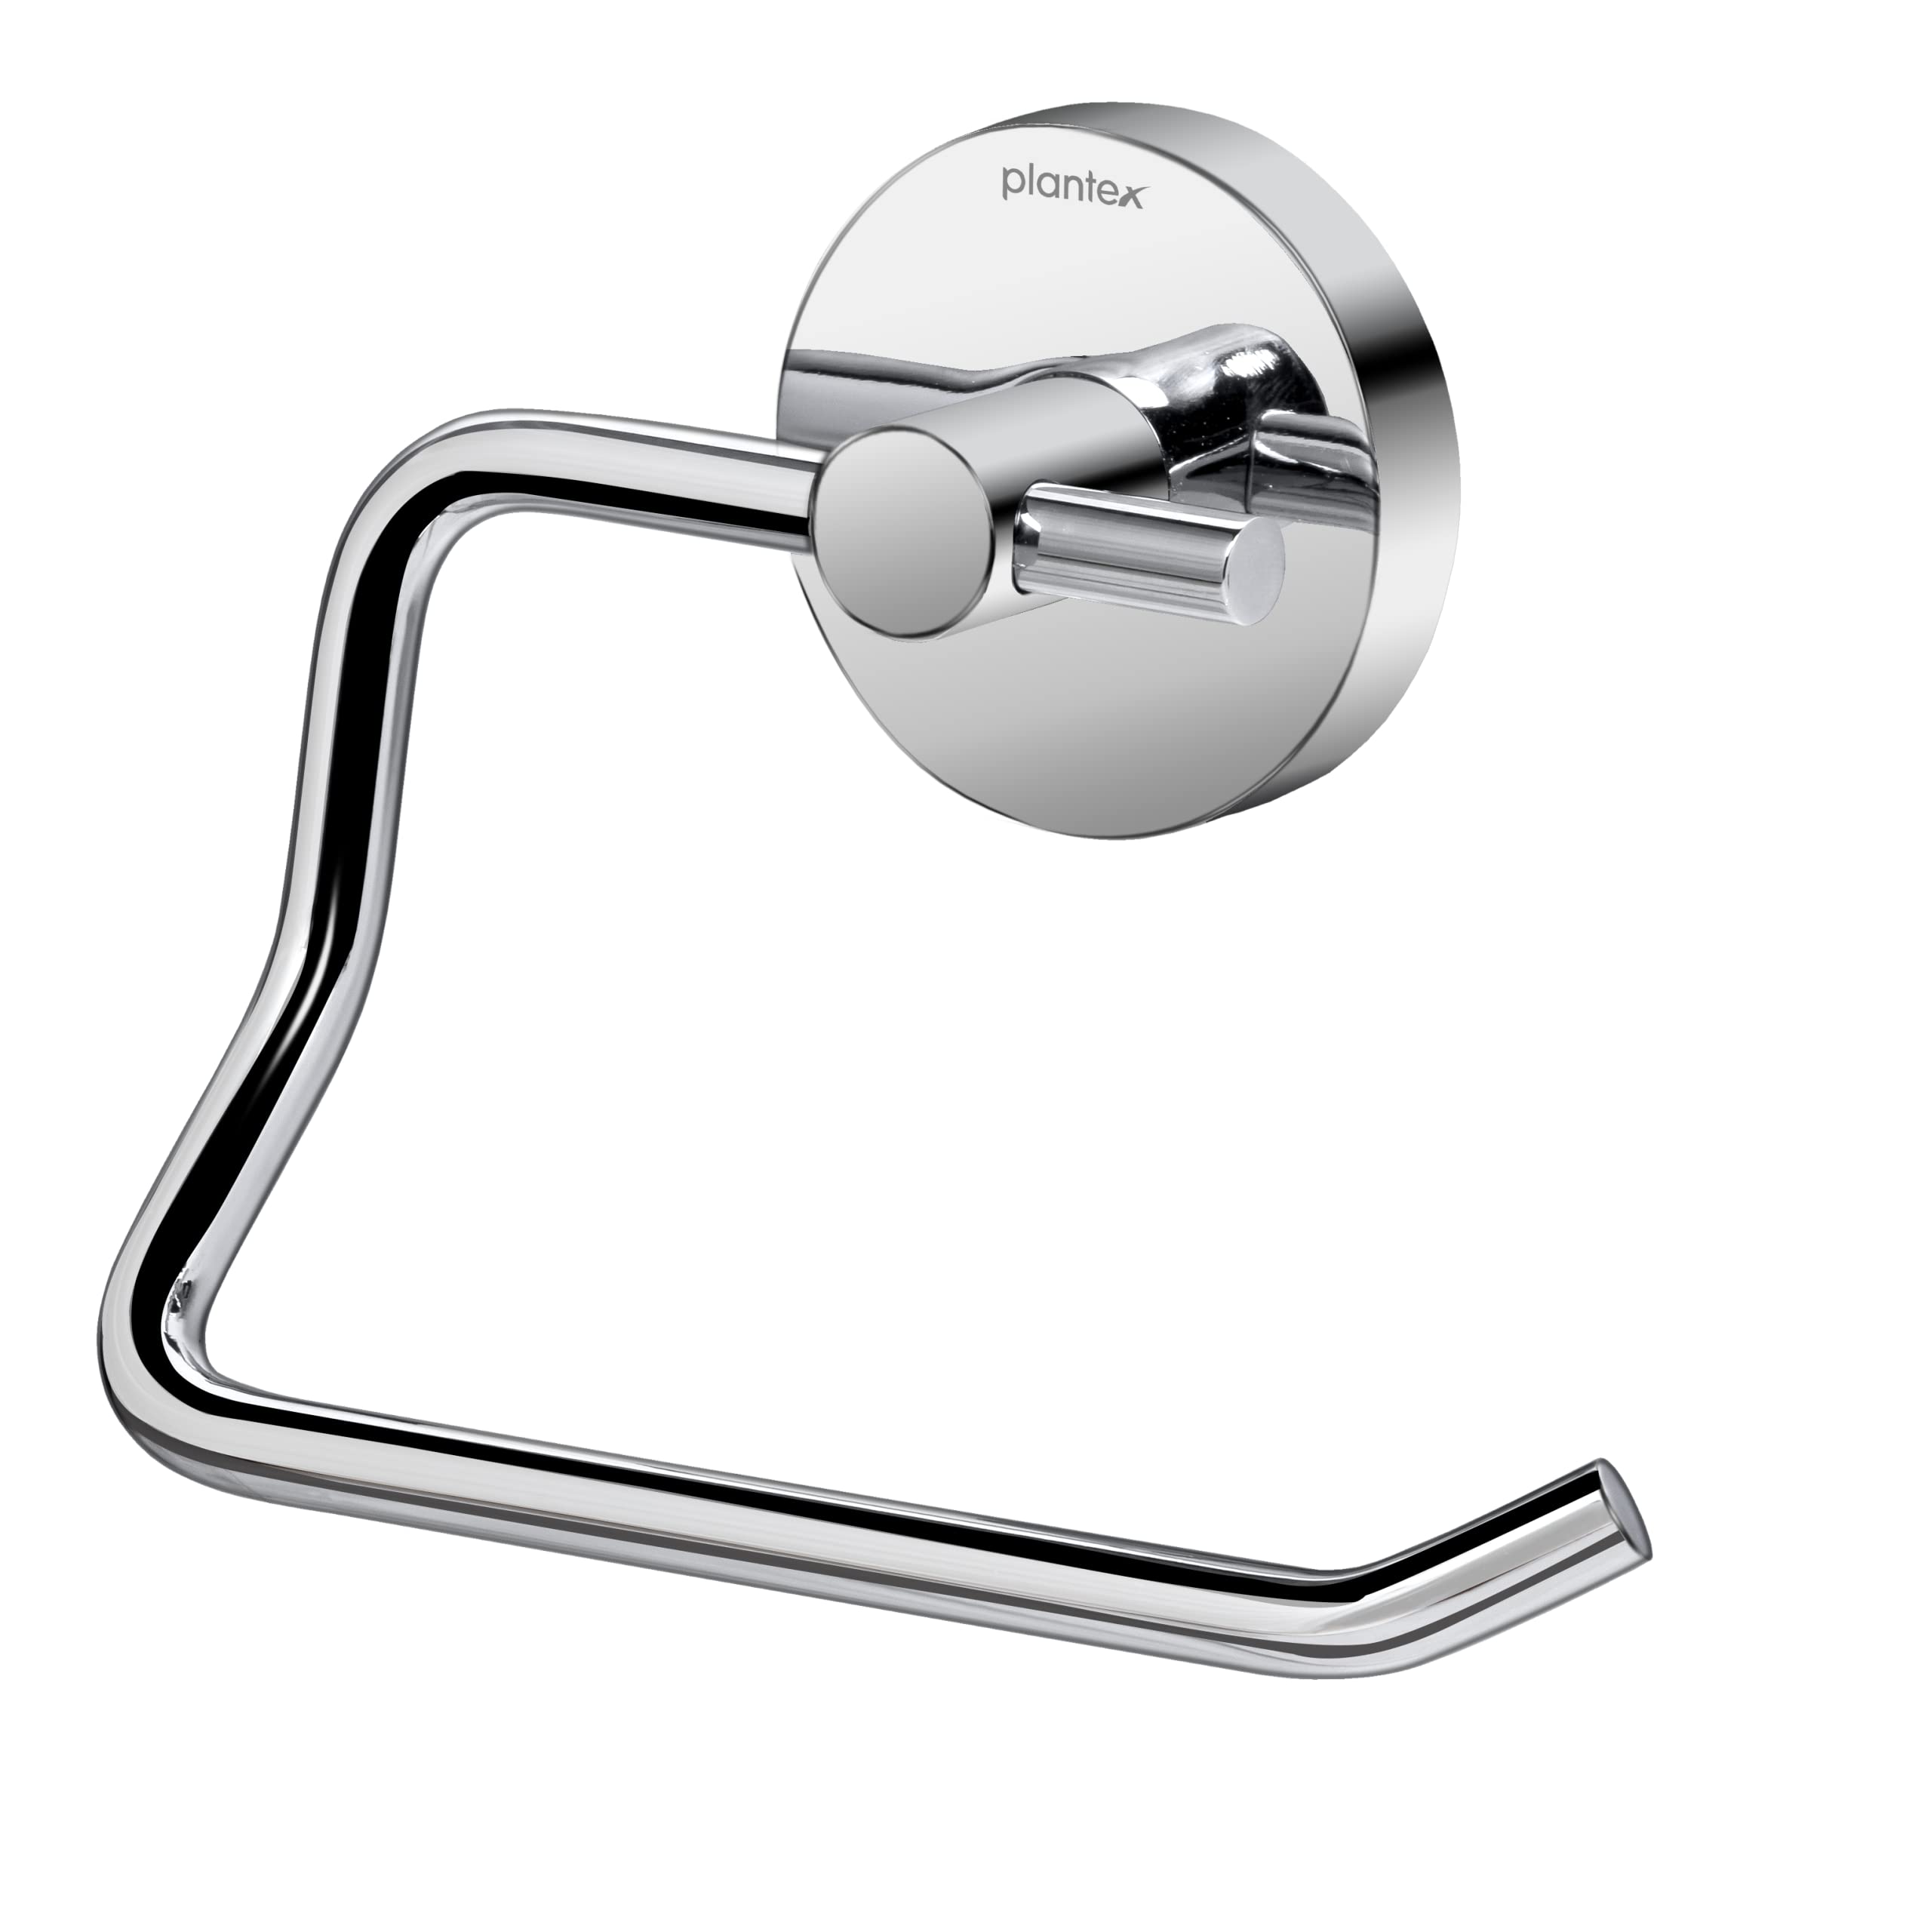 Plantex Fully Brass Tissue/Toilet Paper roll Holder Stand for The washroom (Shiny Silver)